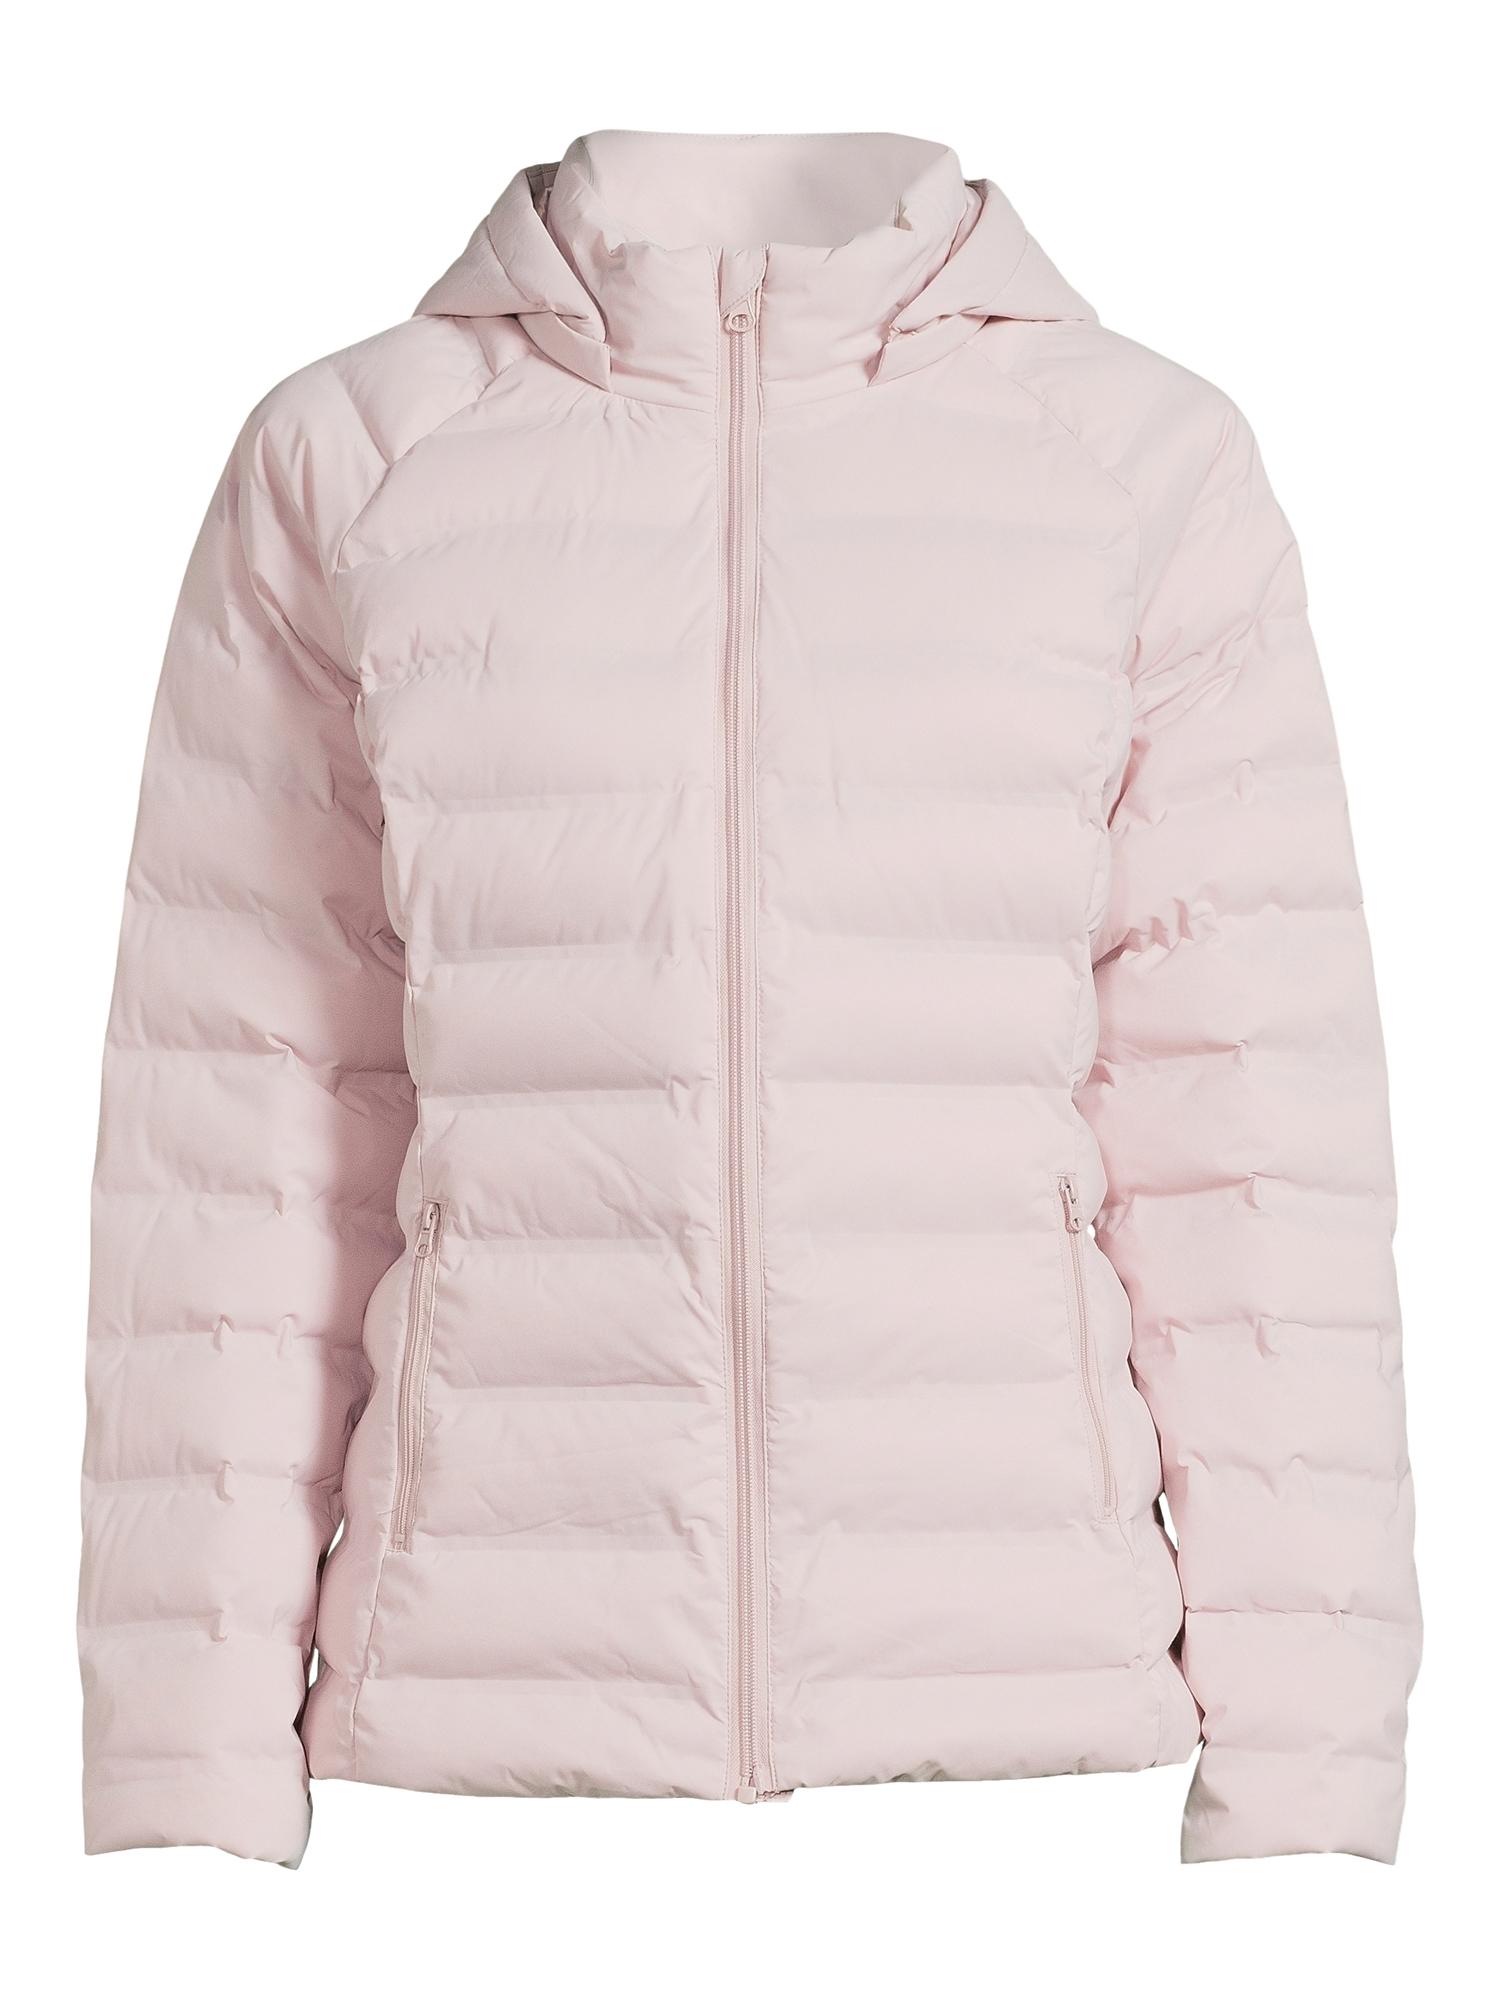 Time and Tru Women's and Plus Packable Stretch Zip Up Puffer Jacket - image 4 of 5